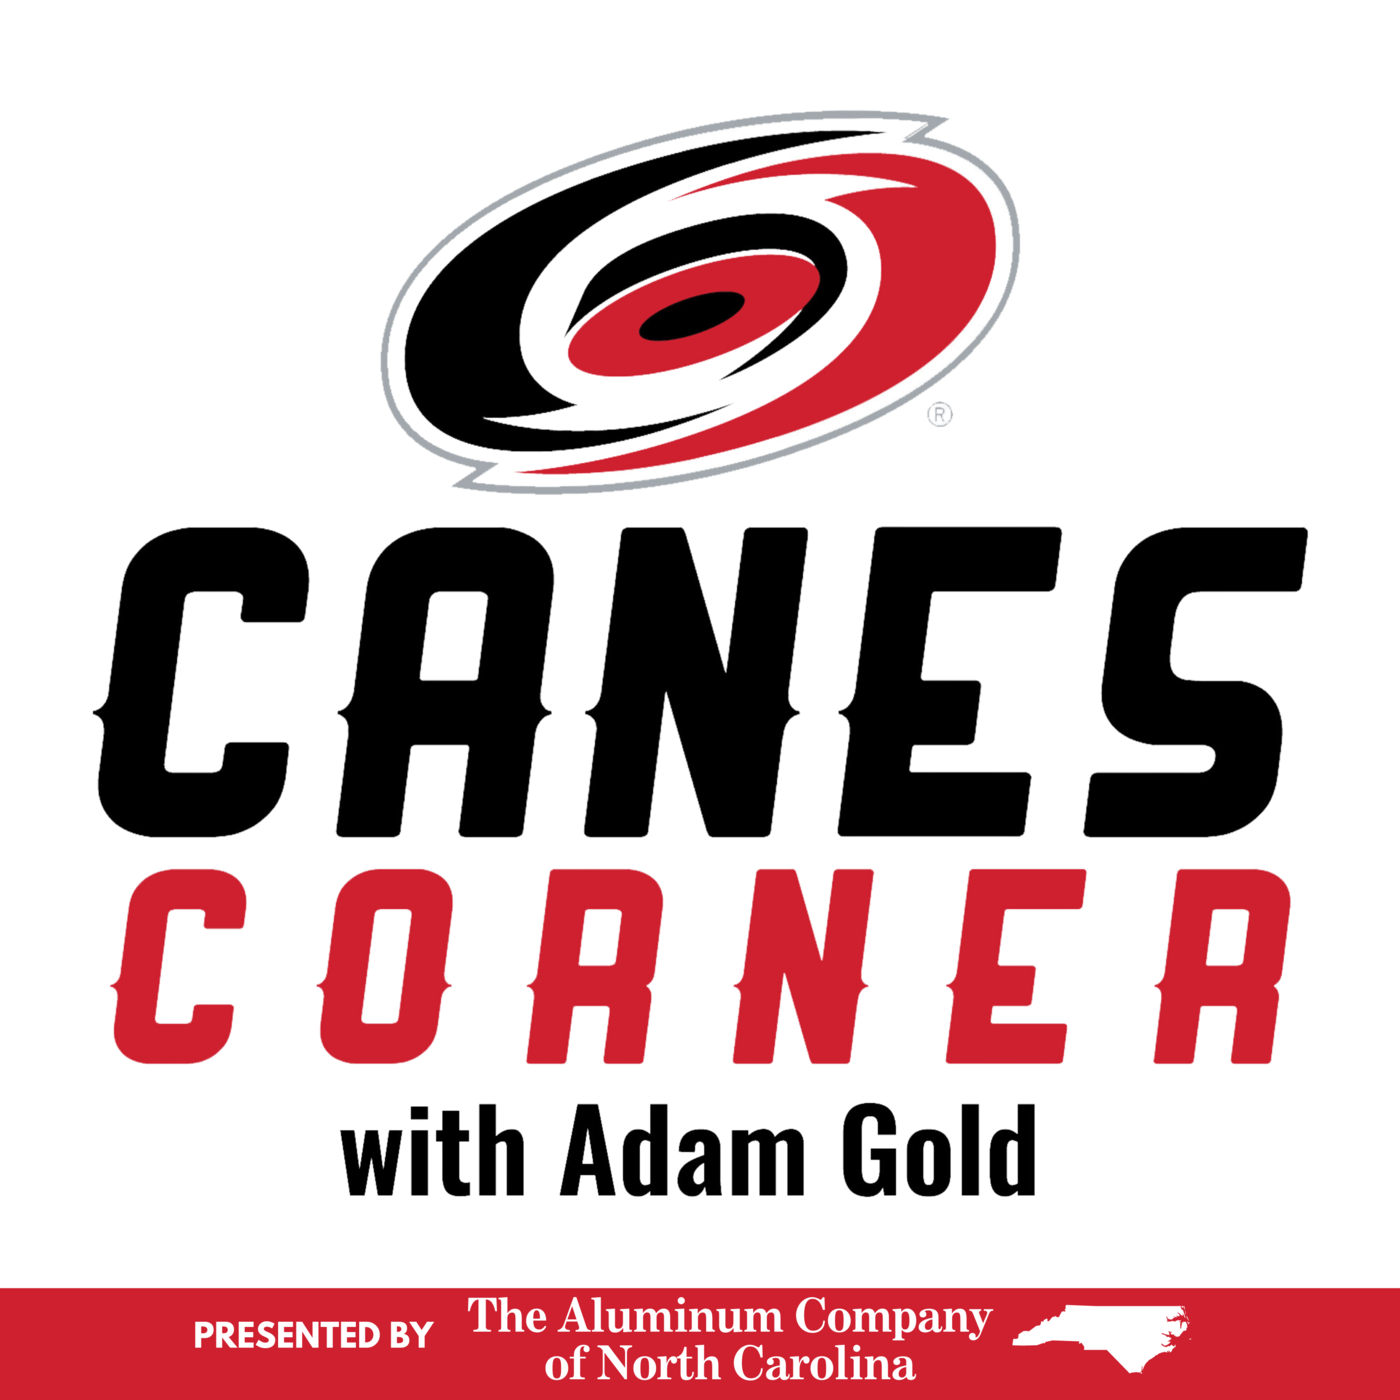 Canes clinch playoff spot with 4-0 win over the Red Wings